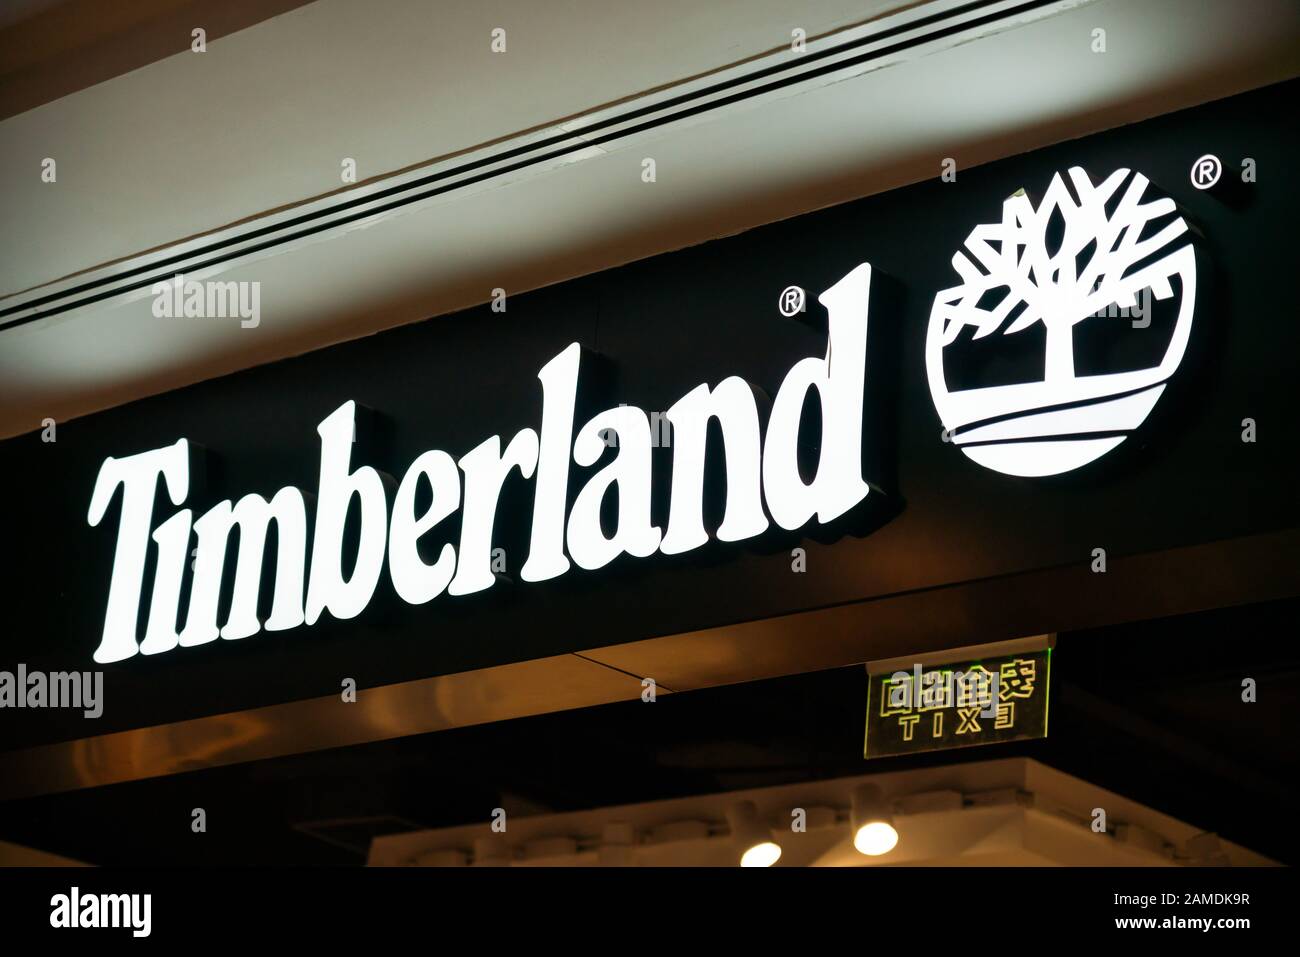 Timberland Logo High Resolution Stock Photography and Images - Alamy